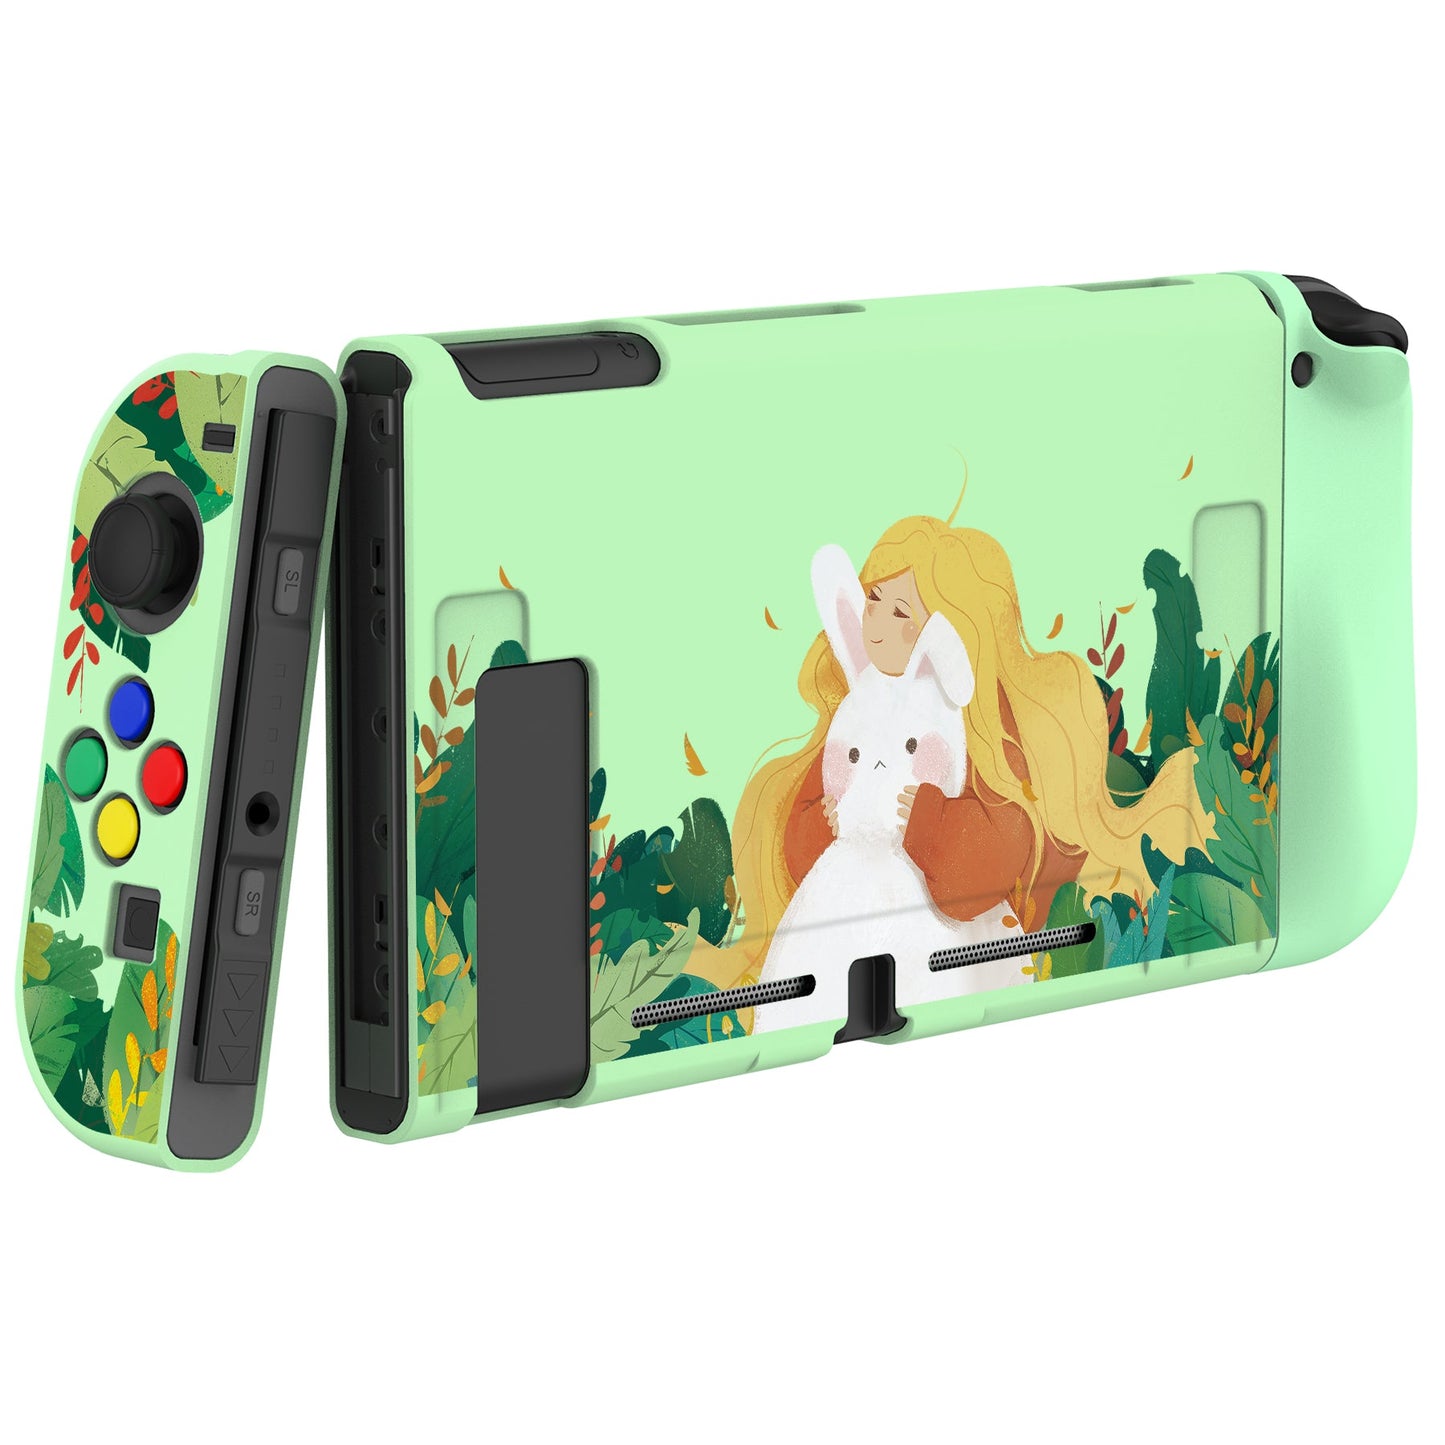 PlayVital Rabbit & Girl Protective Case for NS Switch, Soft TPU Slim Case Cover for NS Switch Joy-Con Console with Colorful ABXY Direction Button Caps - NTU6011 PlayVital